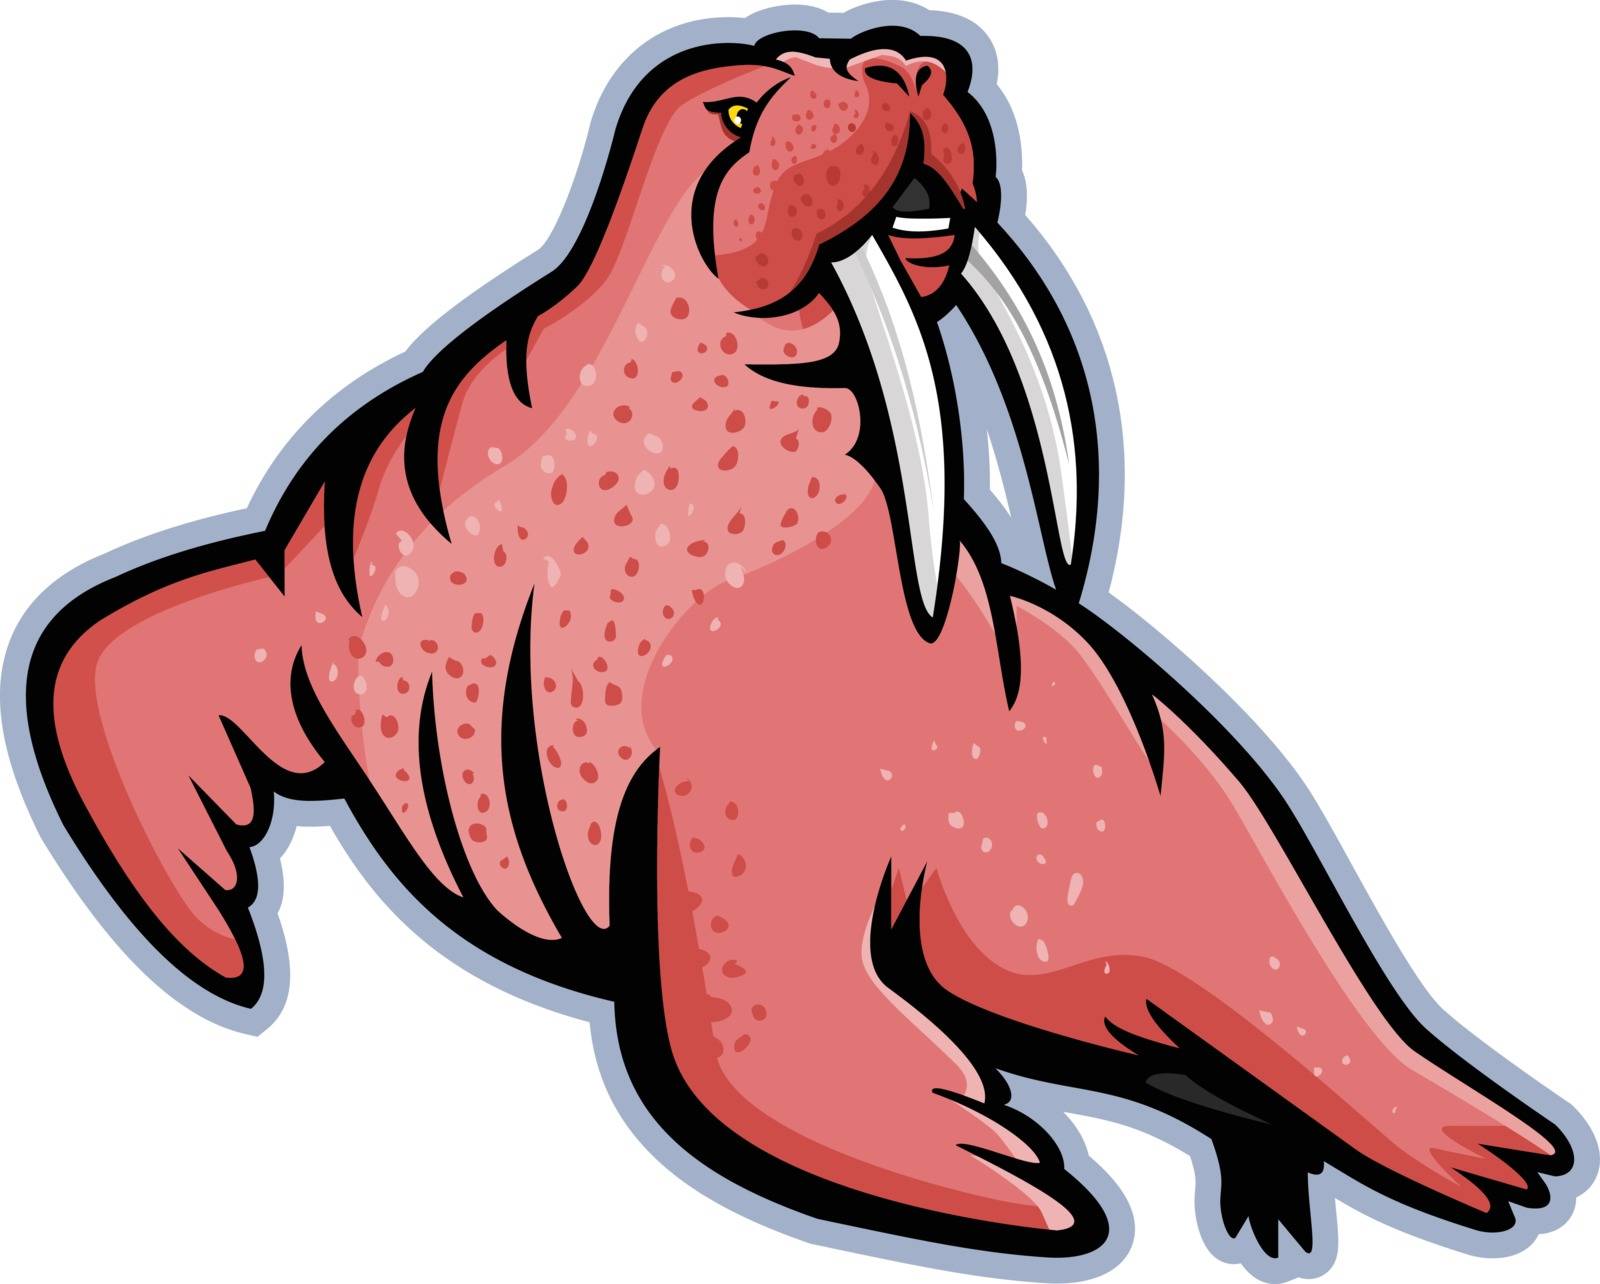 Mascot icon illustration of a male mustached and long-tusked Atlantic or Pacific walrus, a large flippered marine mammal  viewed from side on isolated background in retro style.